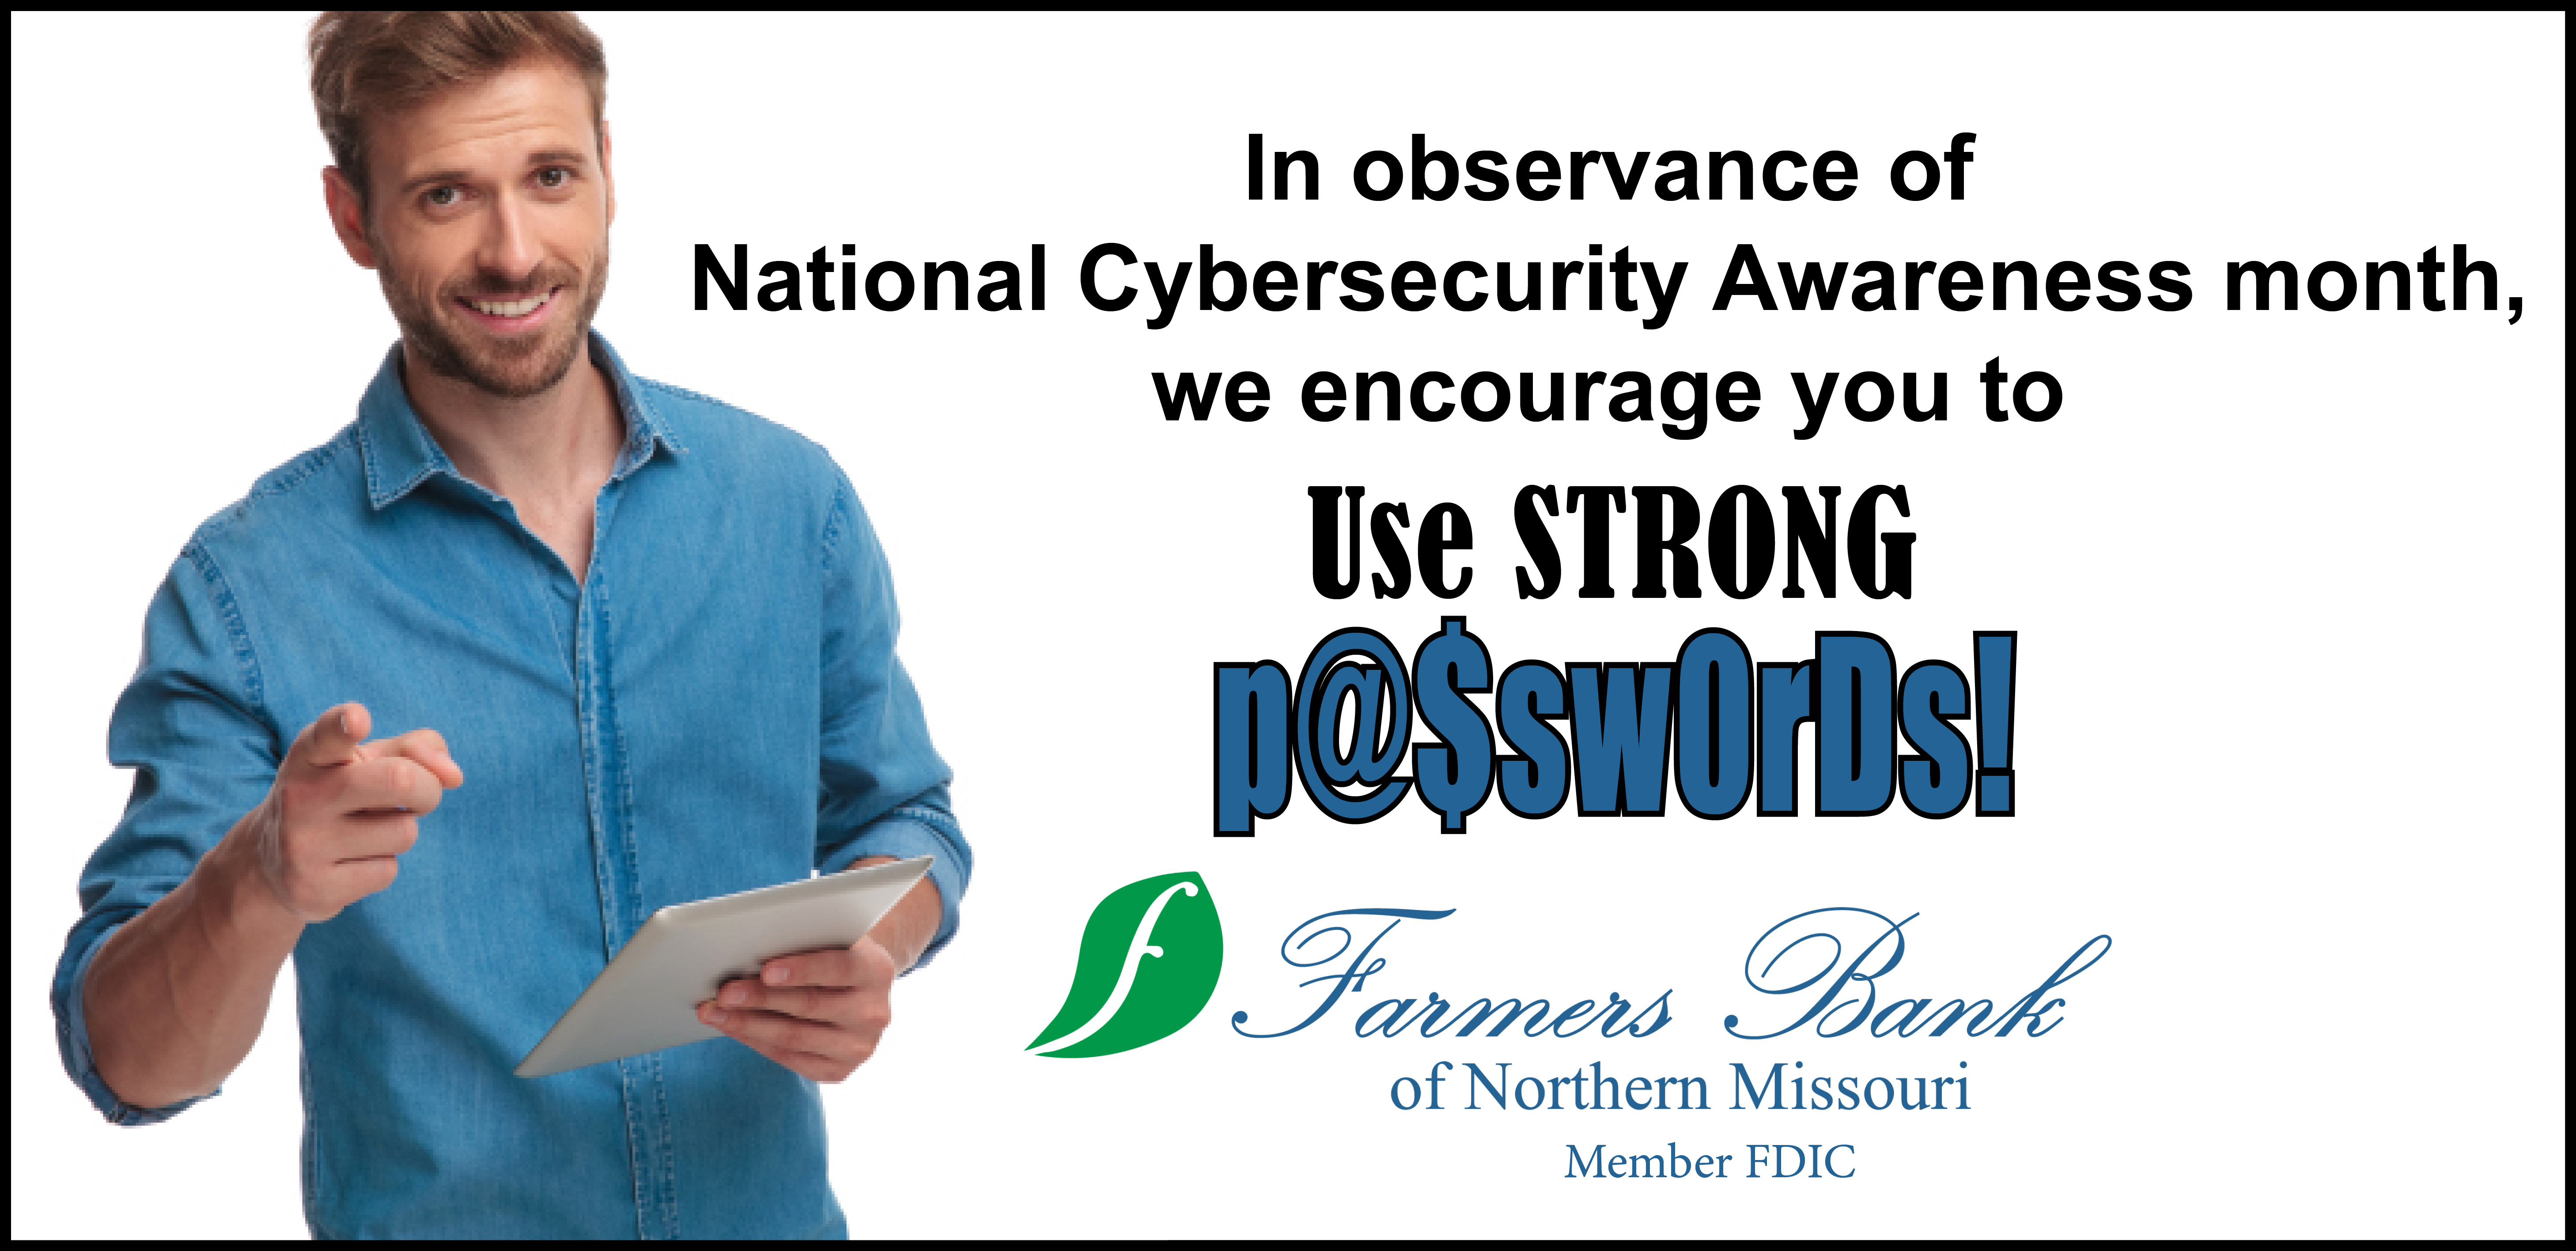 In observance of National Cybersecurity Awareness Month, we encourage you to use strong passwords.